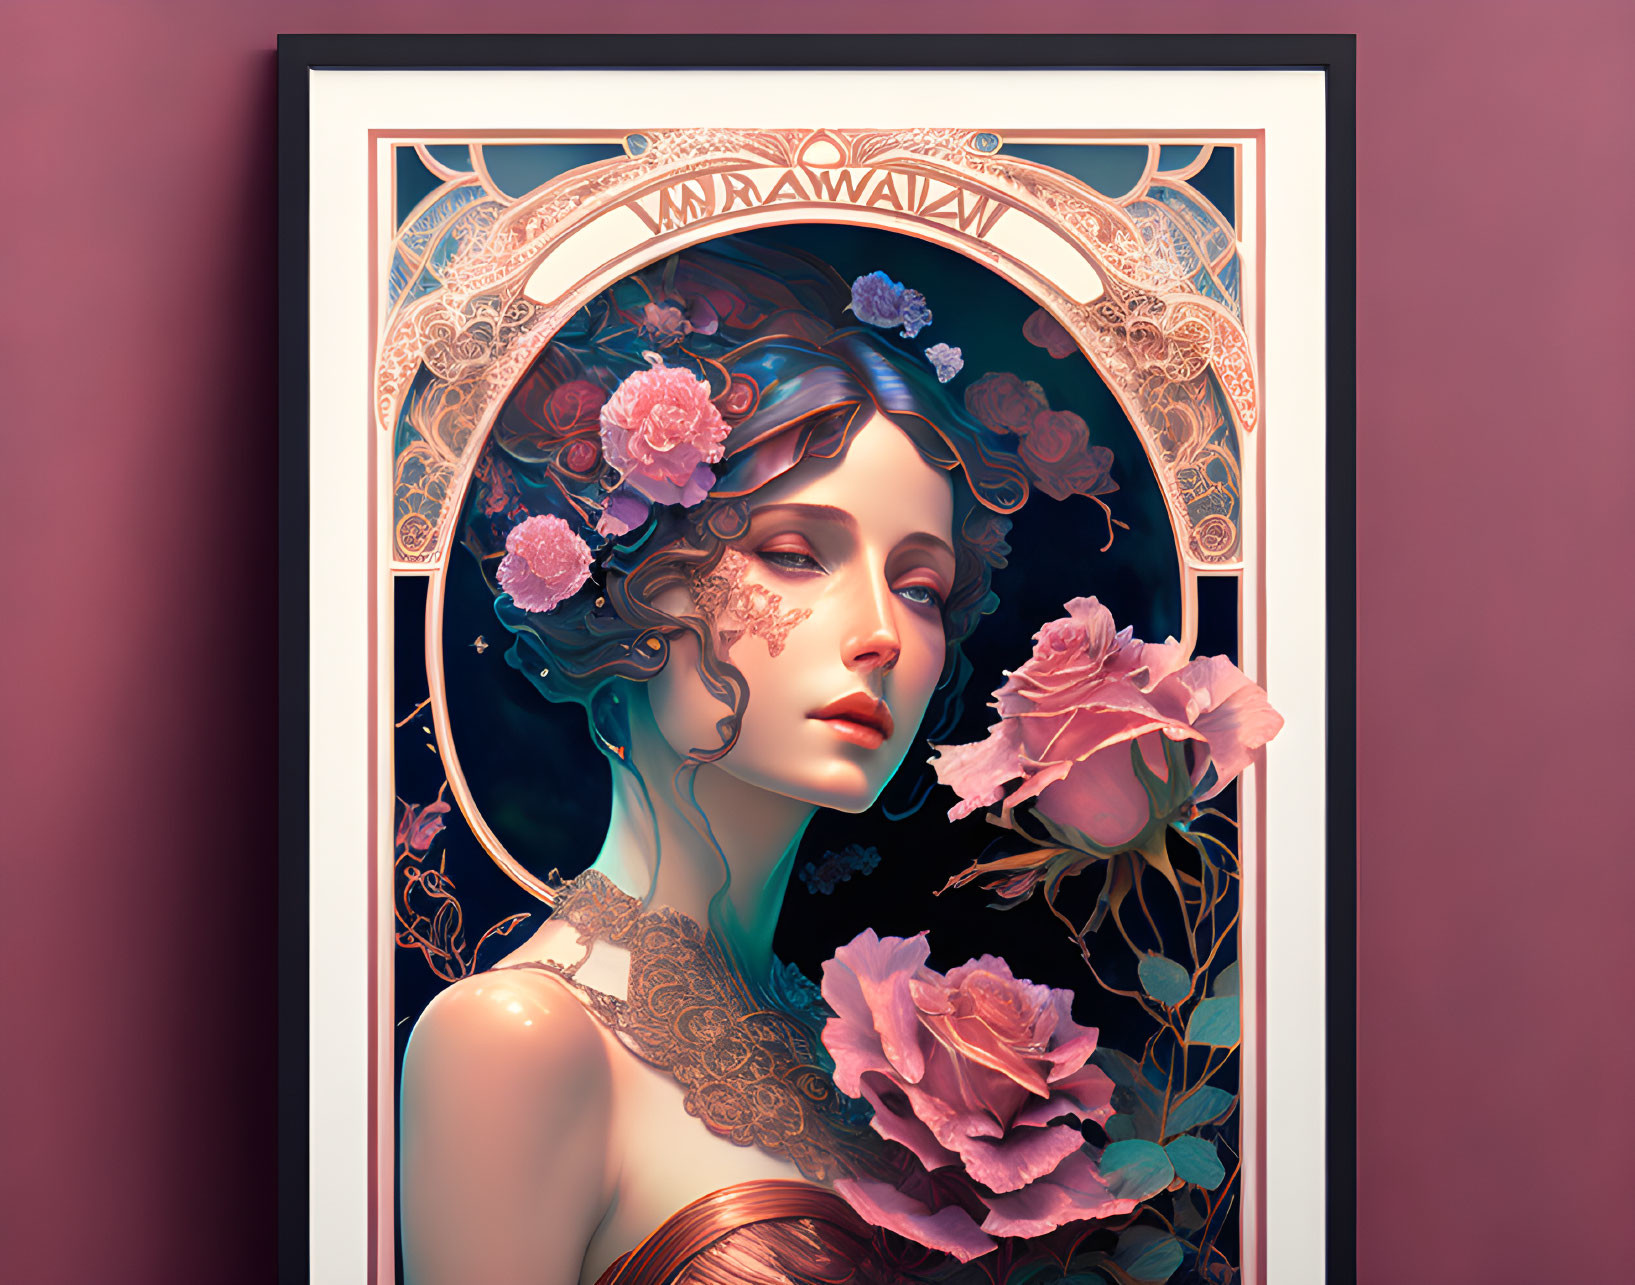 Woman with floral adornments in Art Nouveau style